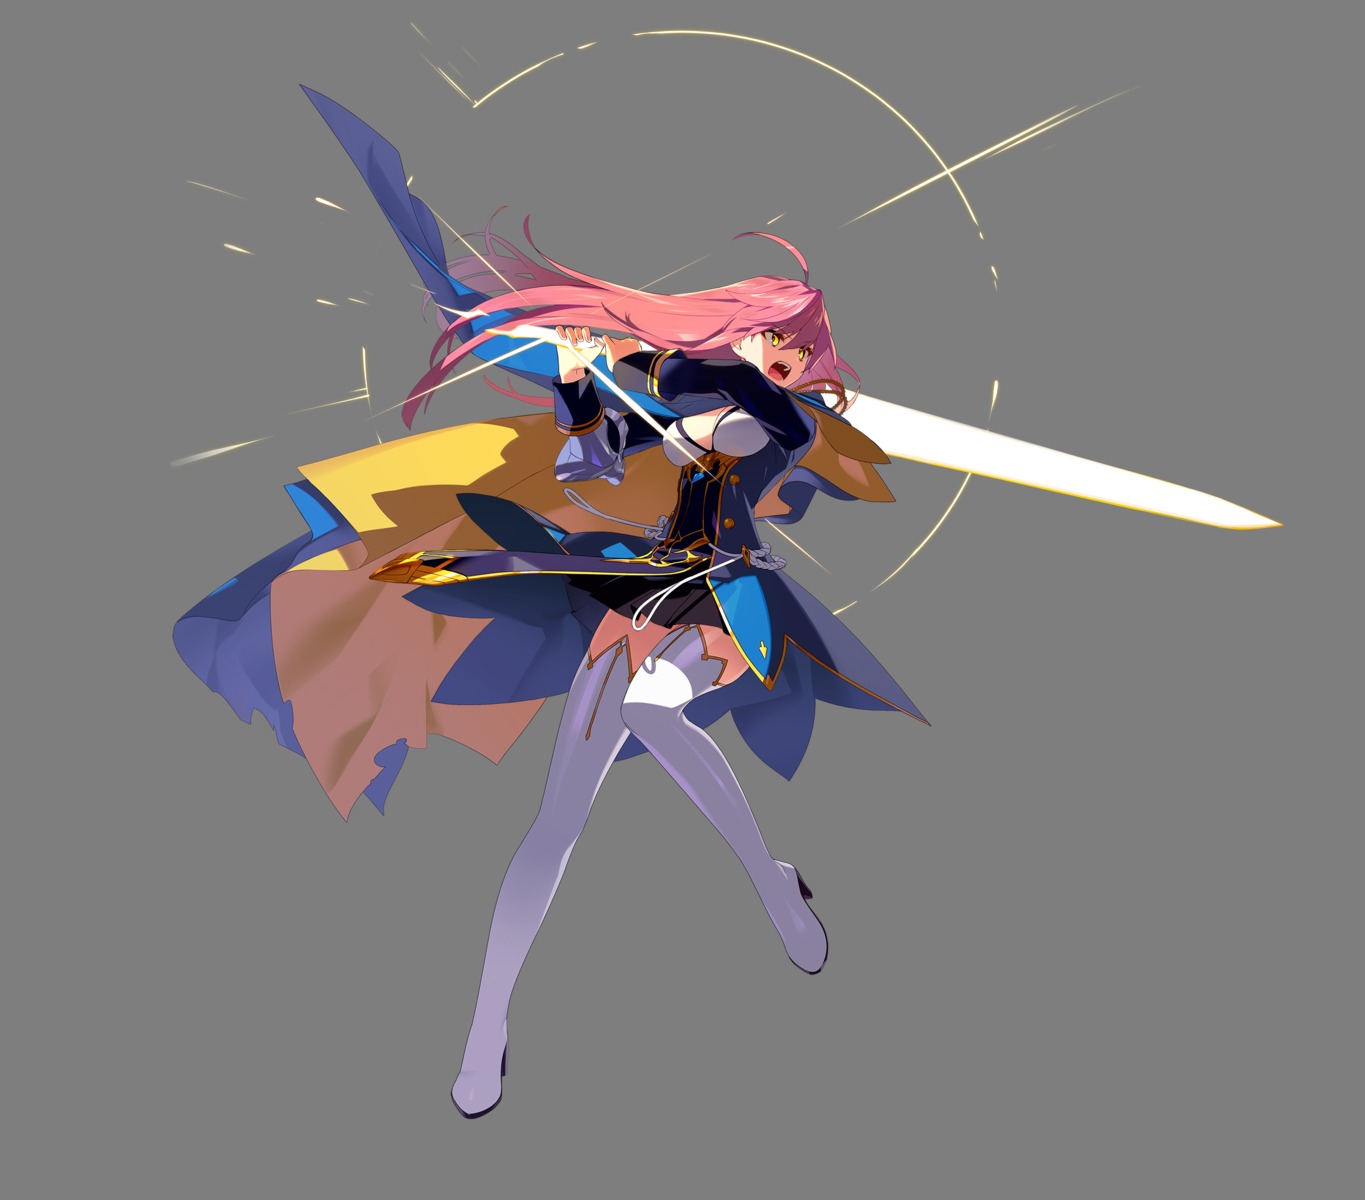 counter:side heels no_bra sword tagme thighhighs transparent_png